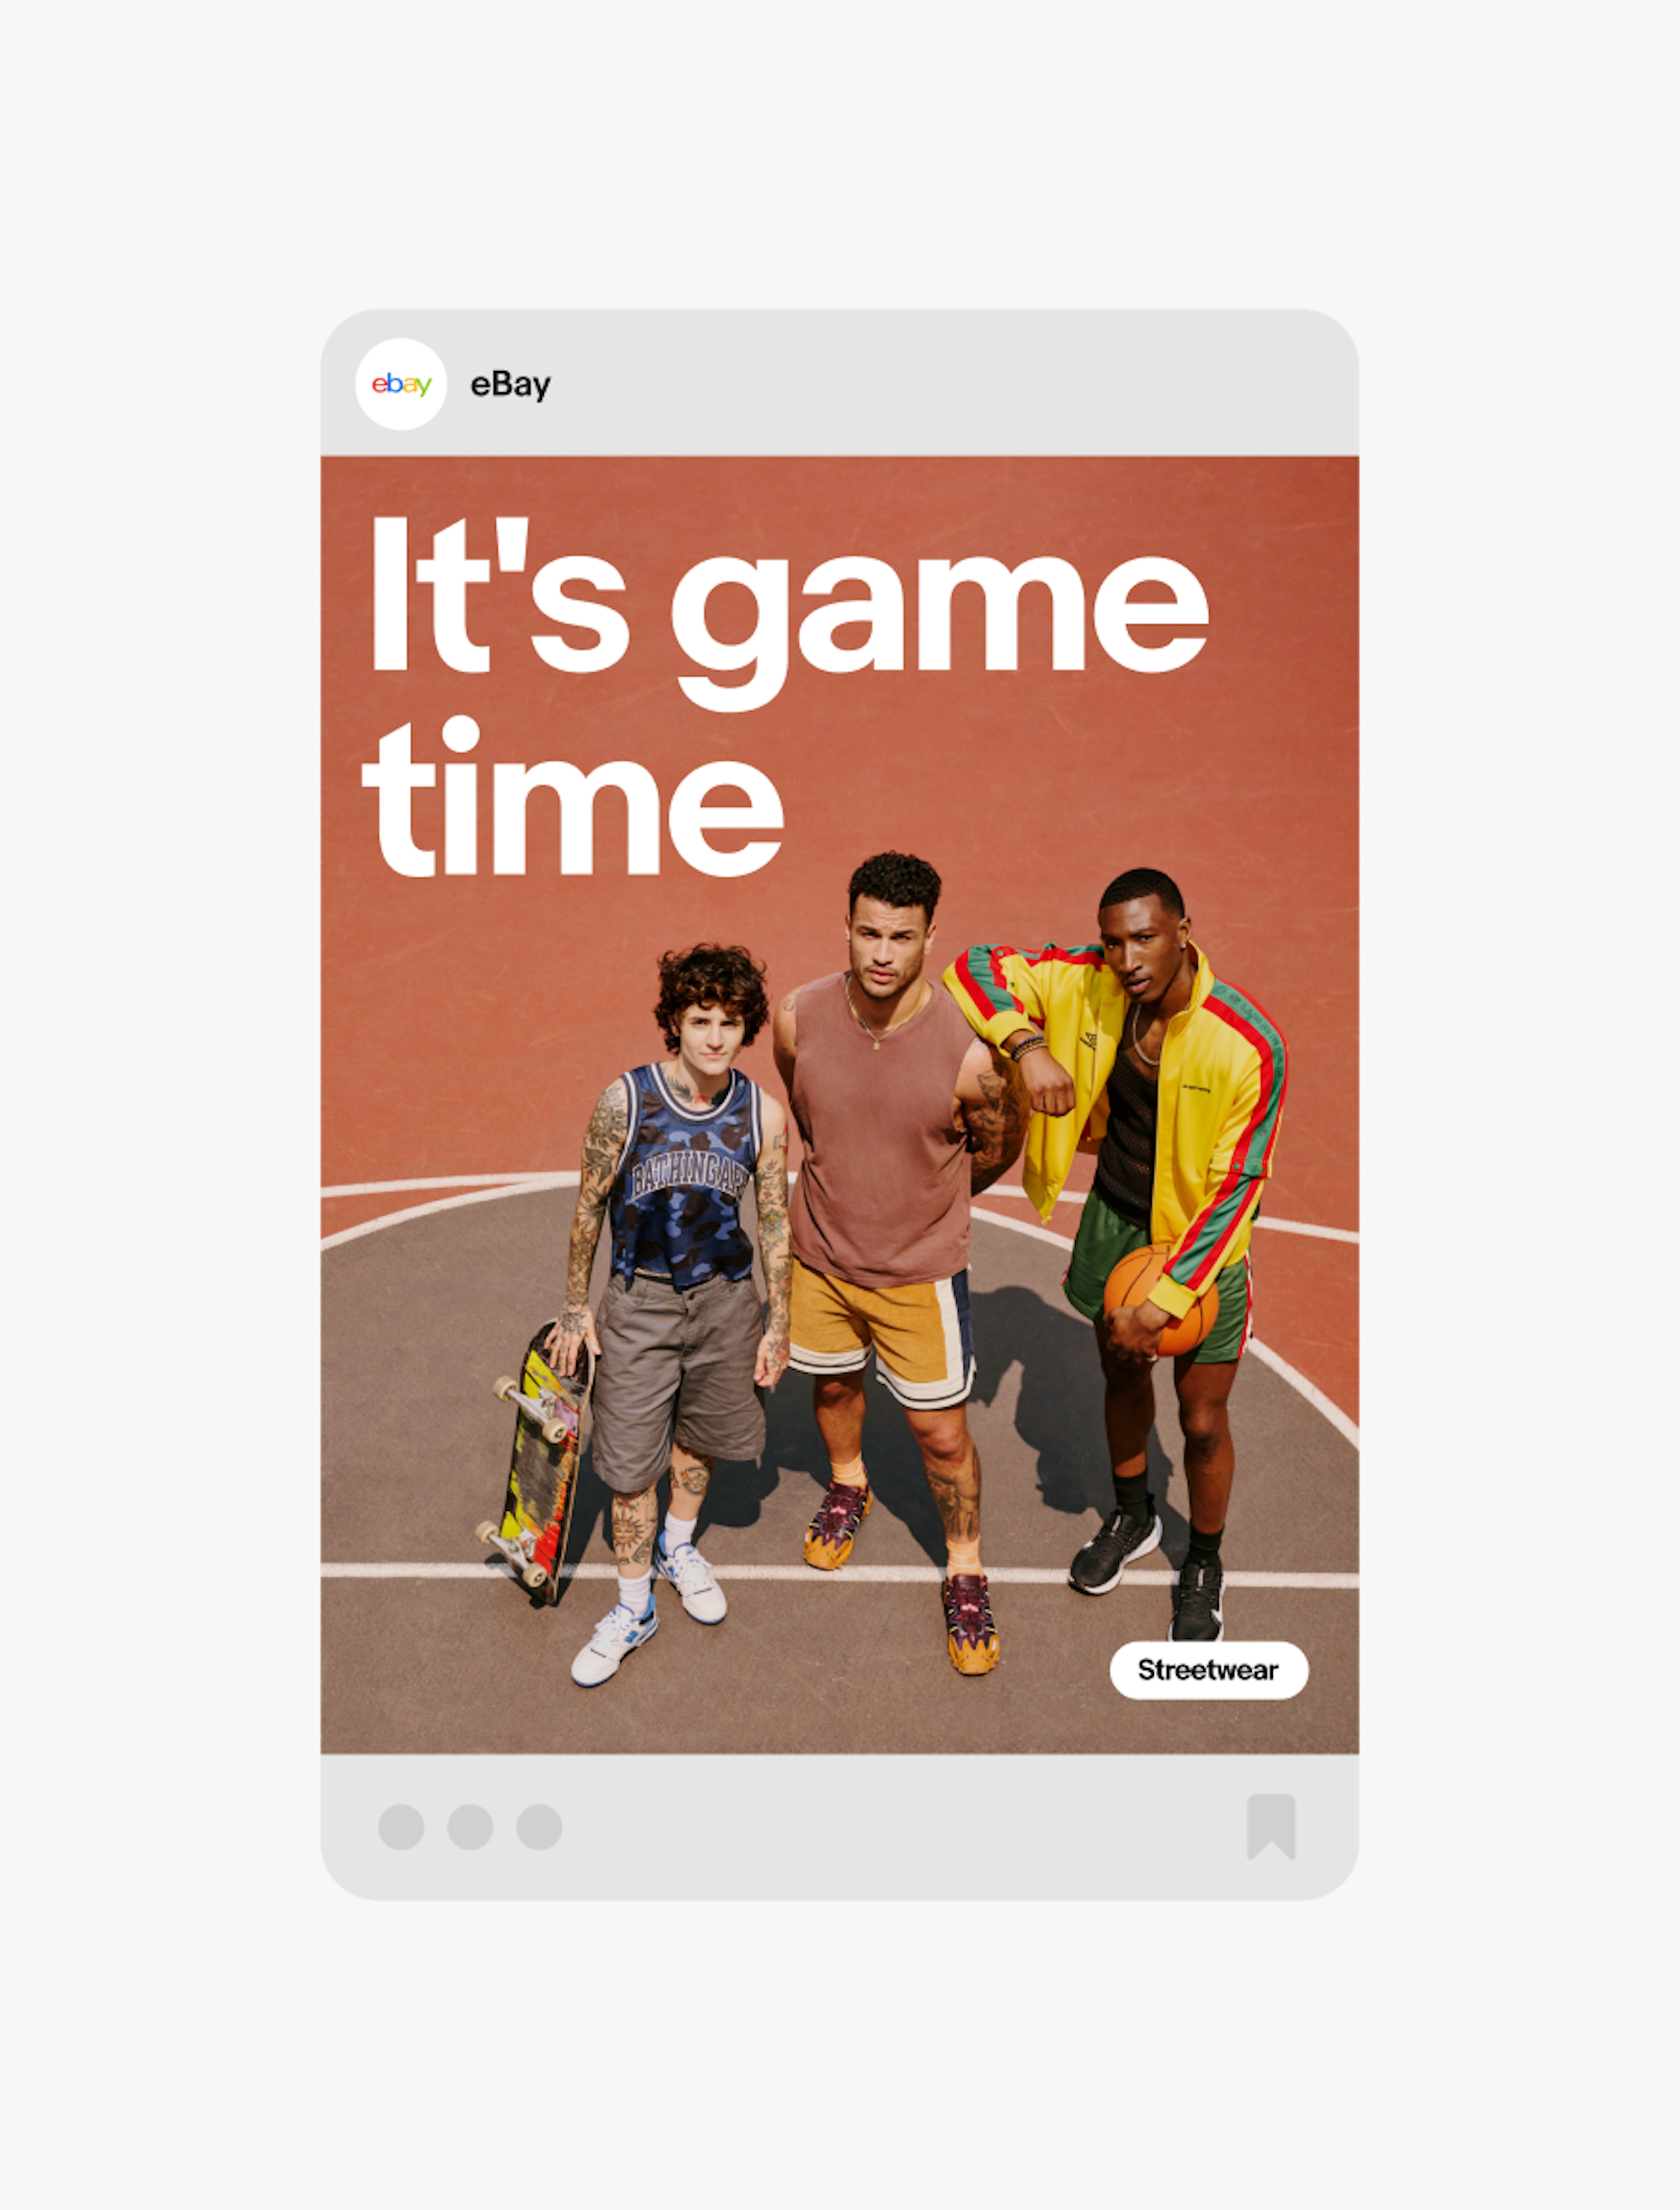 A social media ad with a a full bleed image of three people standing on a basketball court. The headline is “It’s game time”.